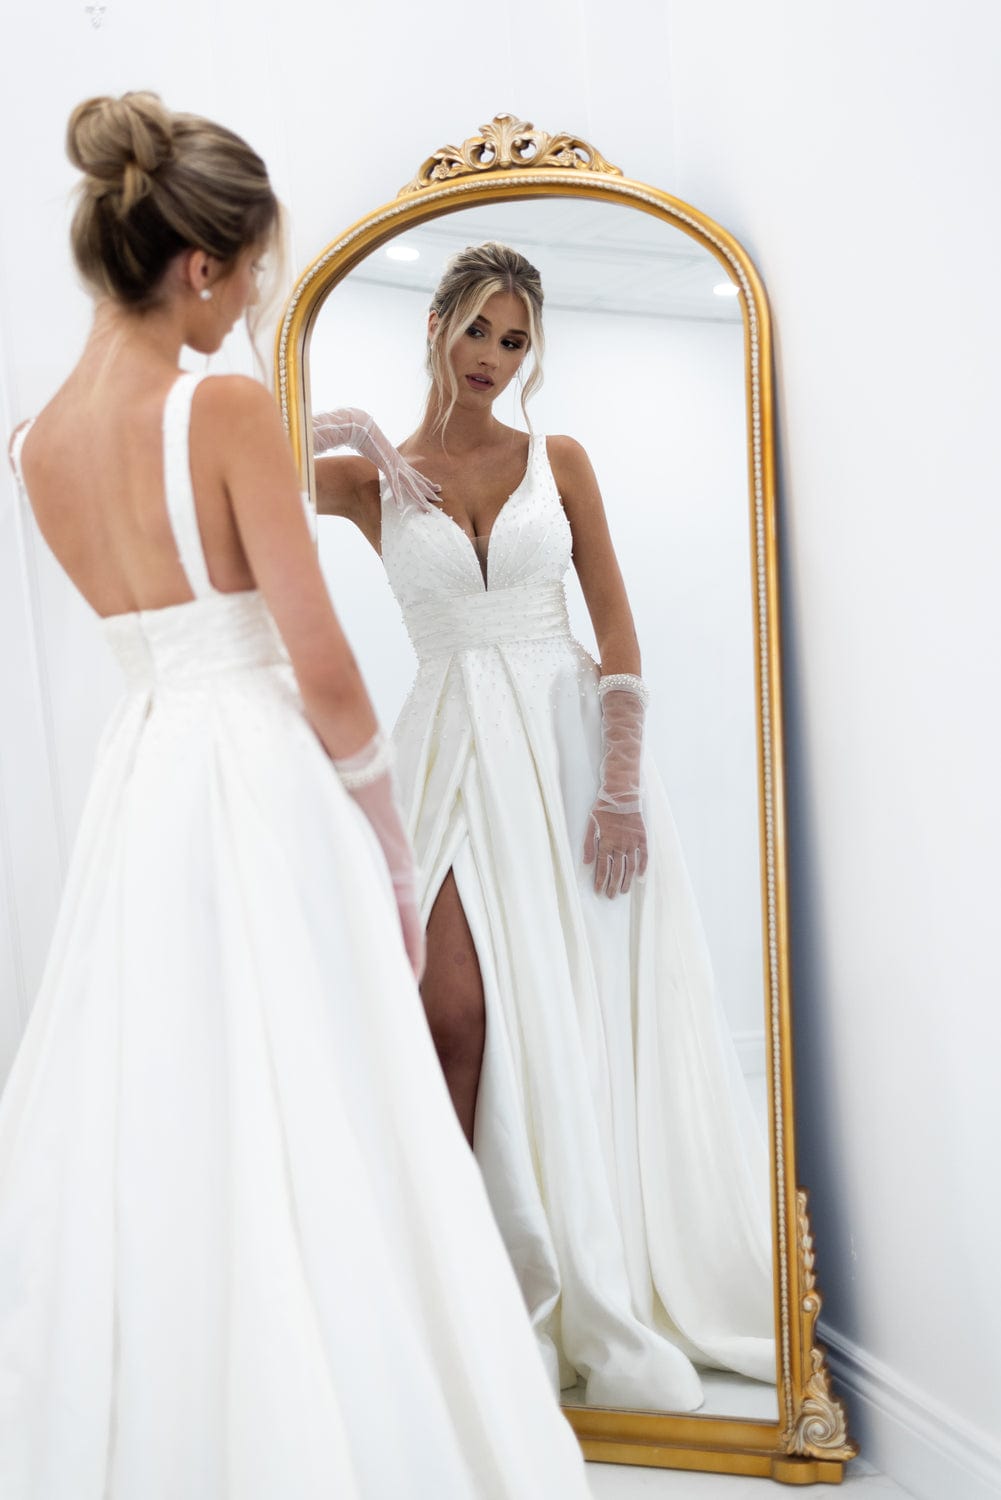 Chic Bridals Wedding Dresses Ivory / Standard delivery 4-6 months +$0 Dixie Wedding Gowns